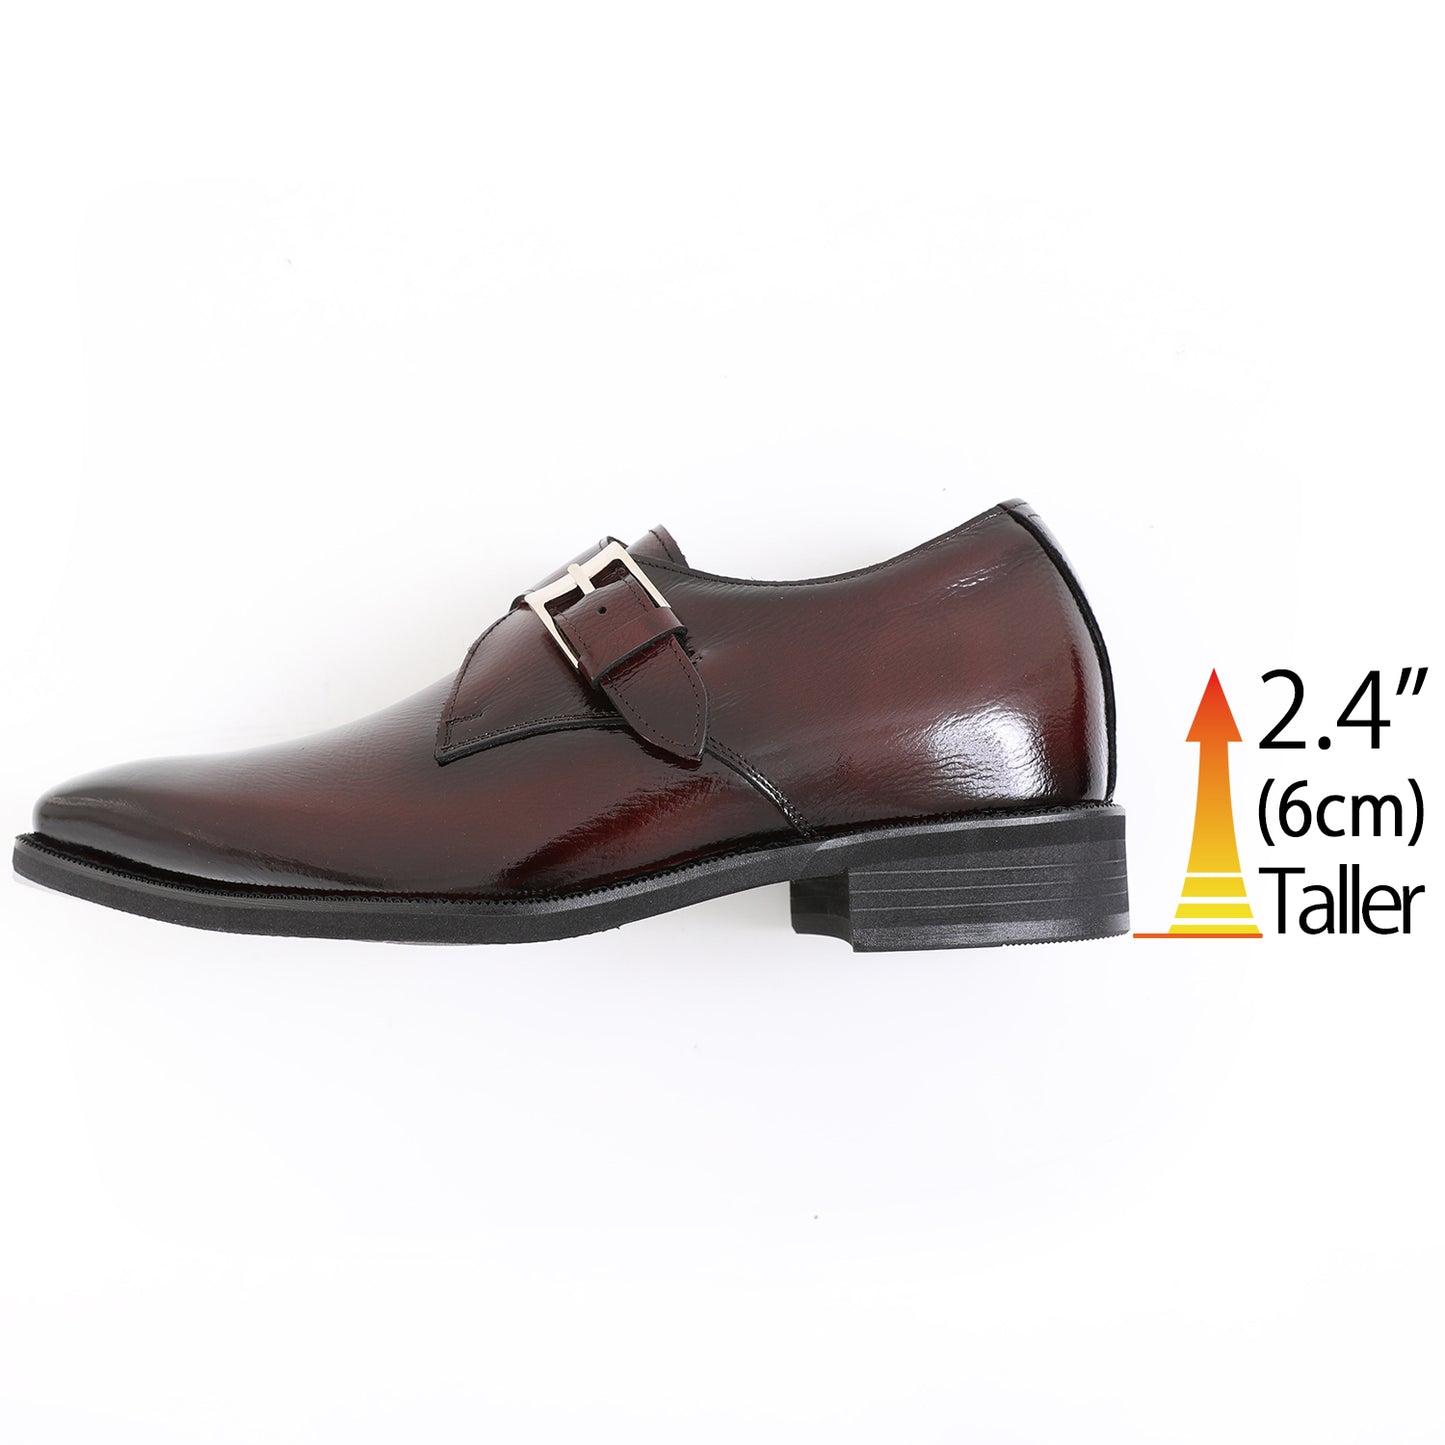 Men's Elevator Shoes Height Increasing 2.36" Taller Oxford Plain Toe Single Monk Strap Slip on Loafers Genuine Leather No. 1925